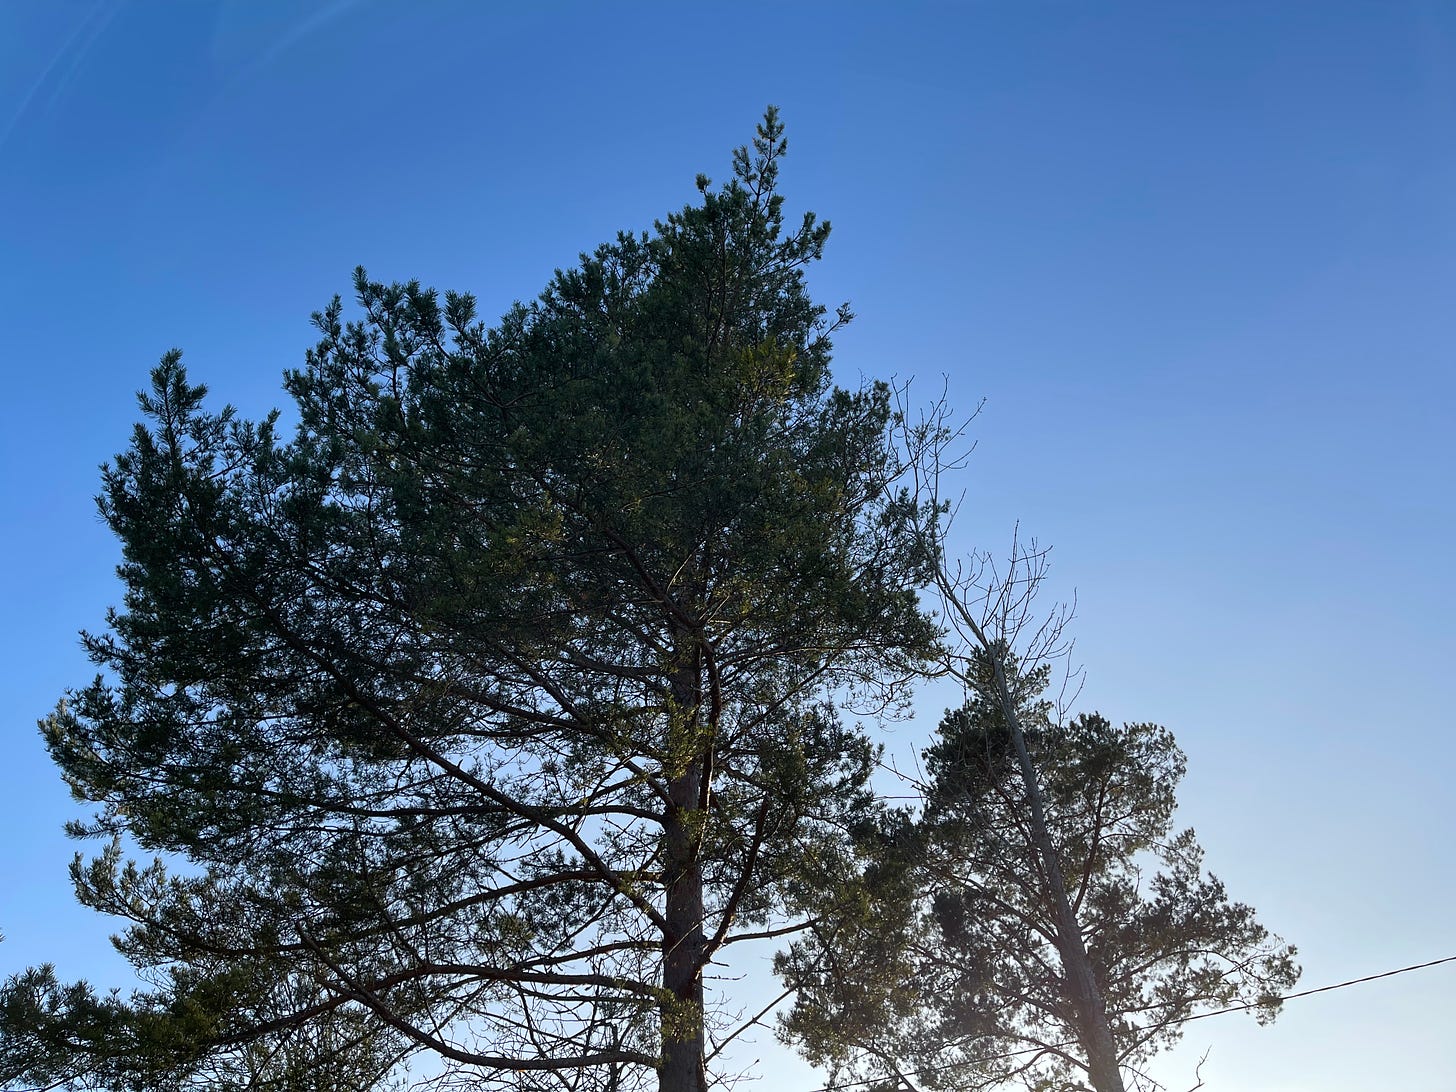 The top half of a pine tree against a blue sky